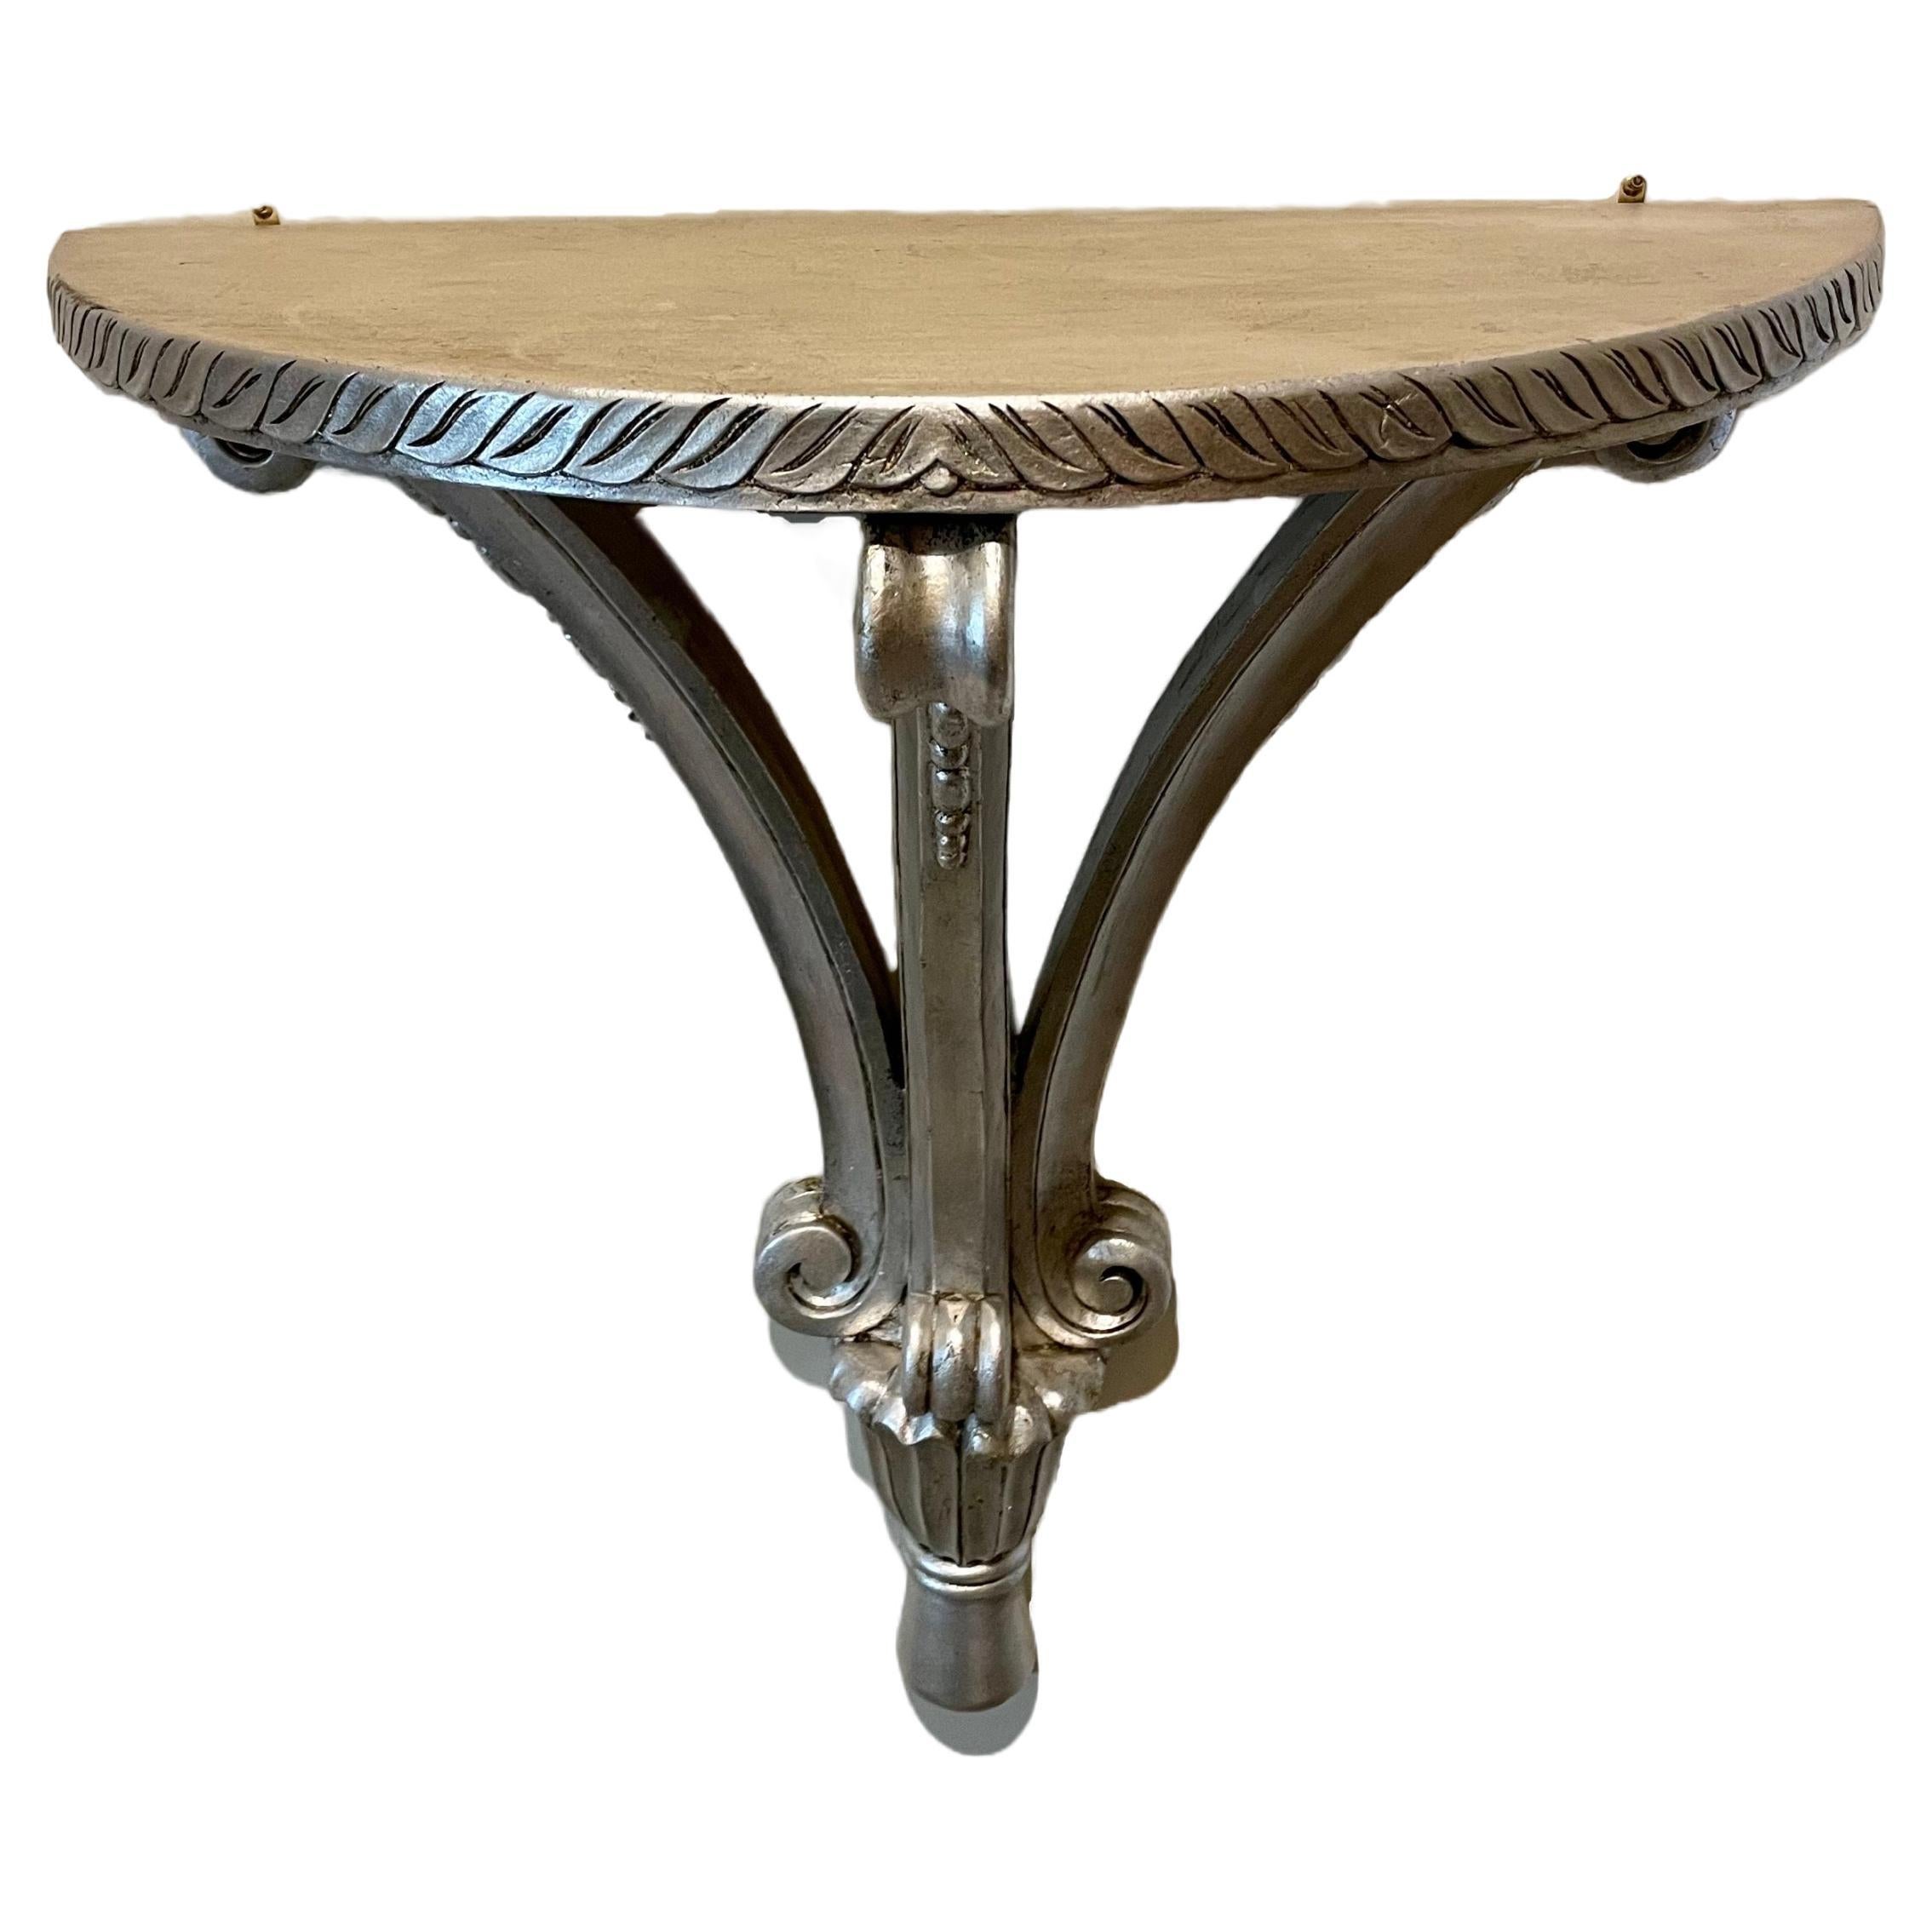 Italian Carved Hanging Silver Leaf Demi Lune  Hanging Console Table.  Nice details, some wear to finish from age and use. Great size measuring 23.5 wide and only 10